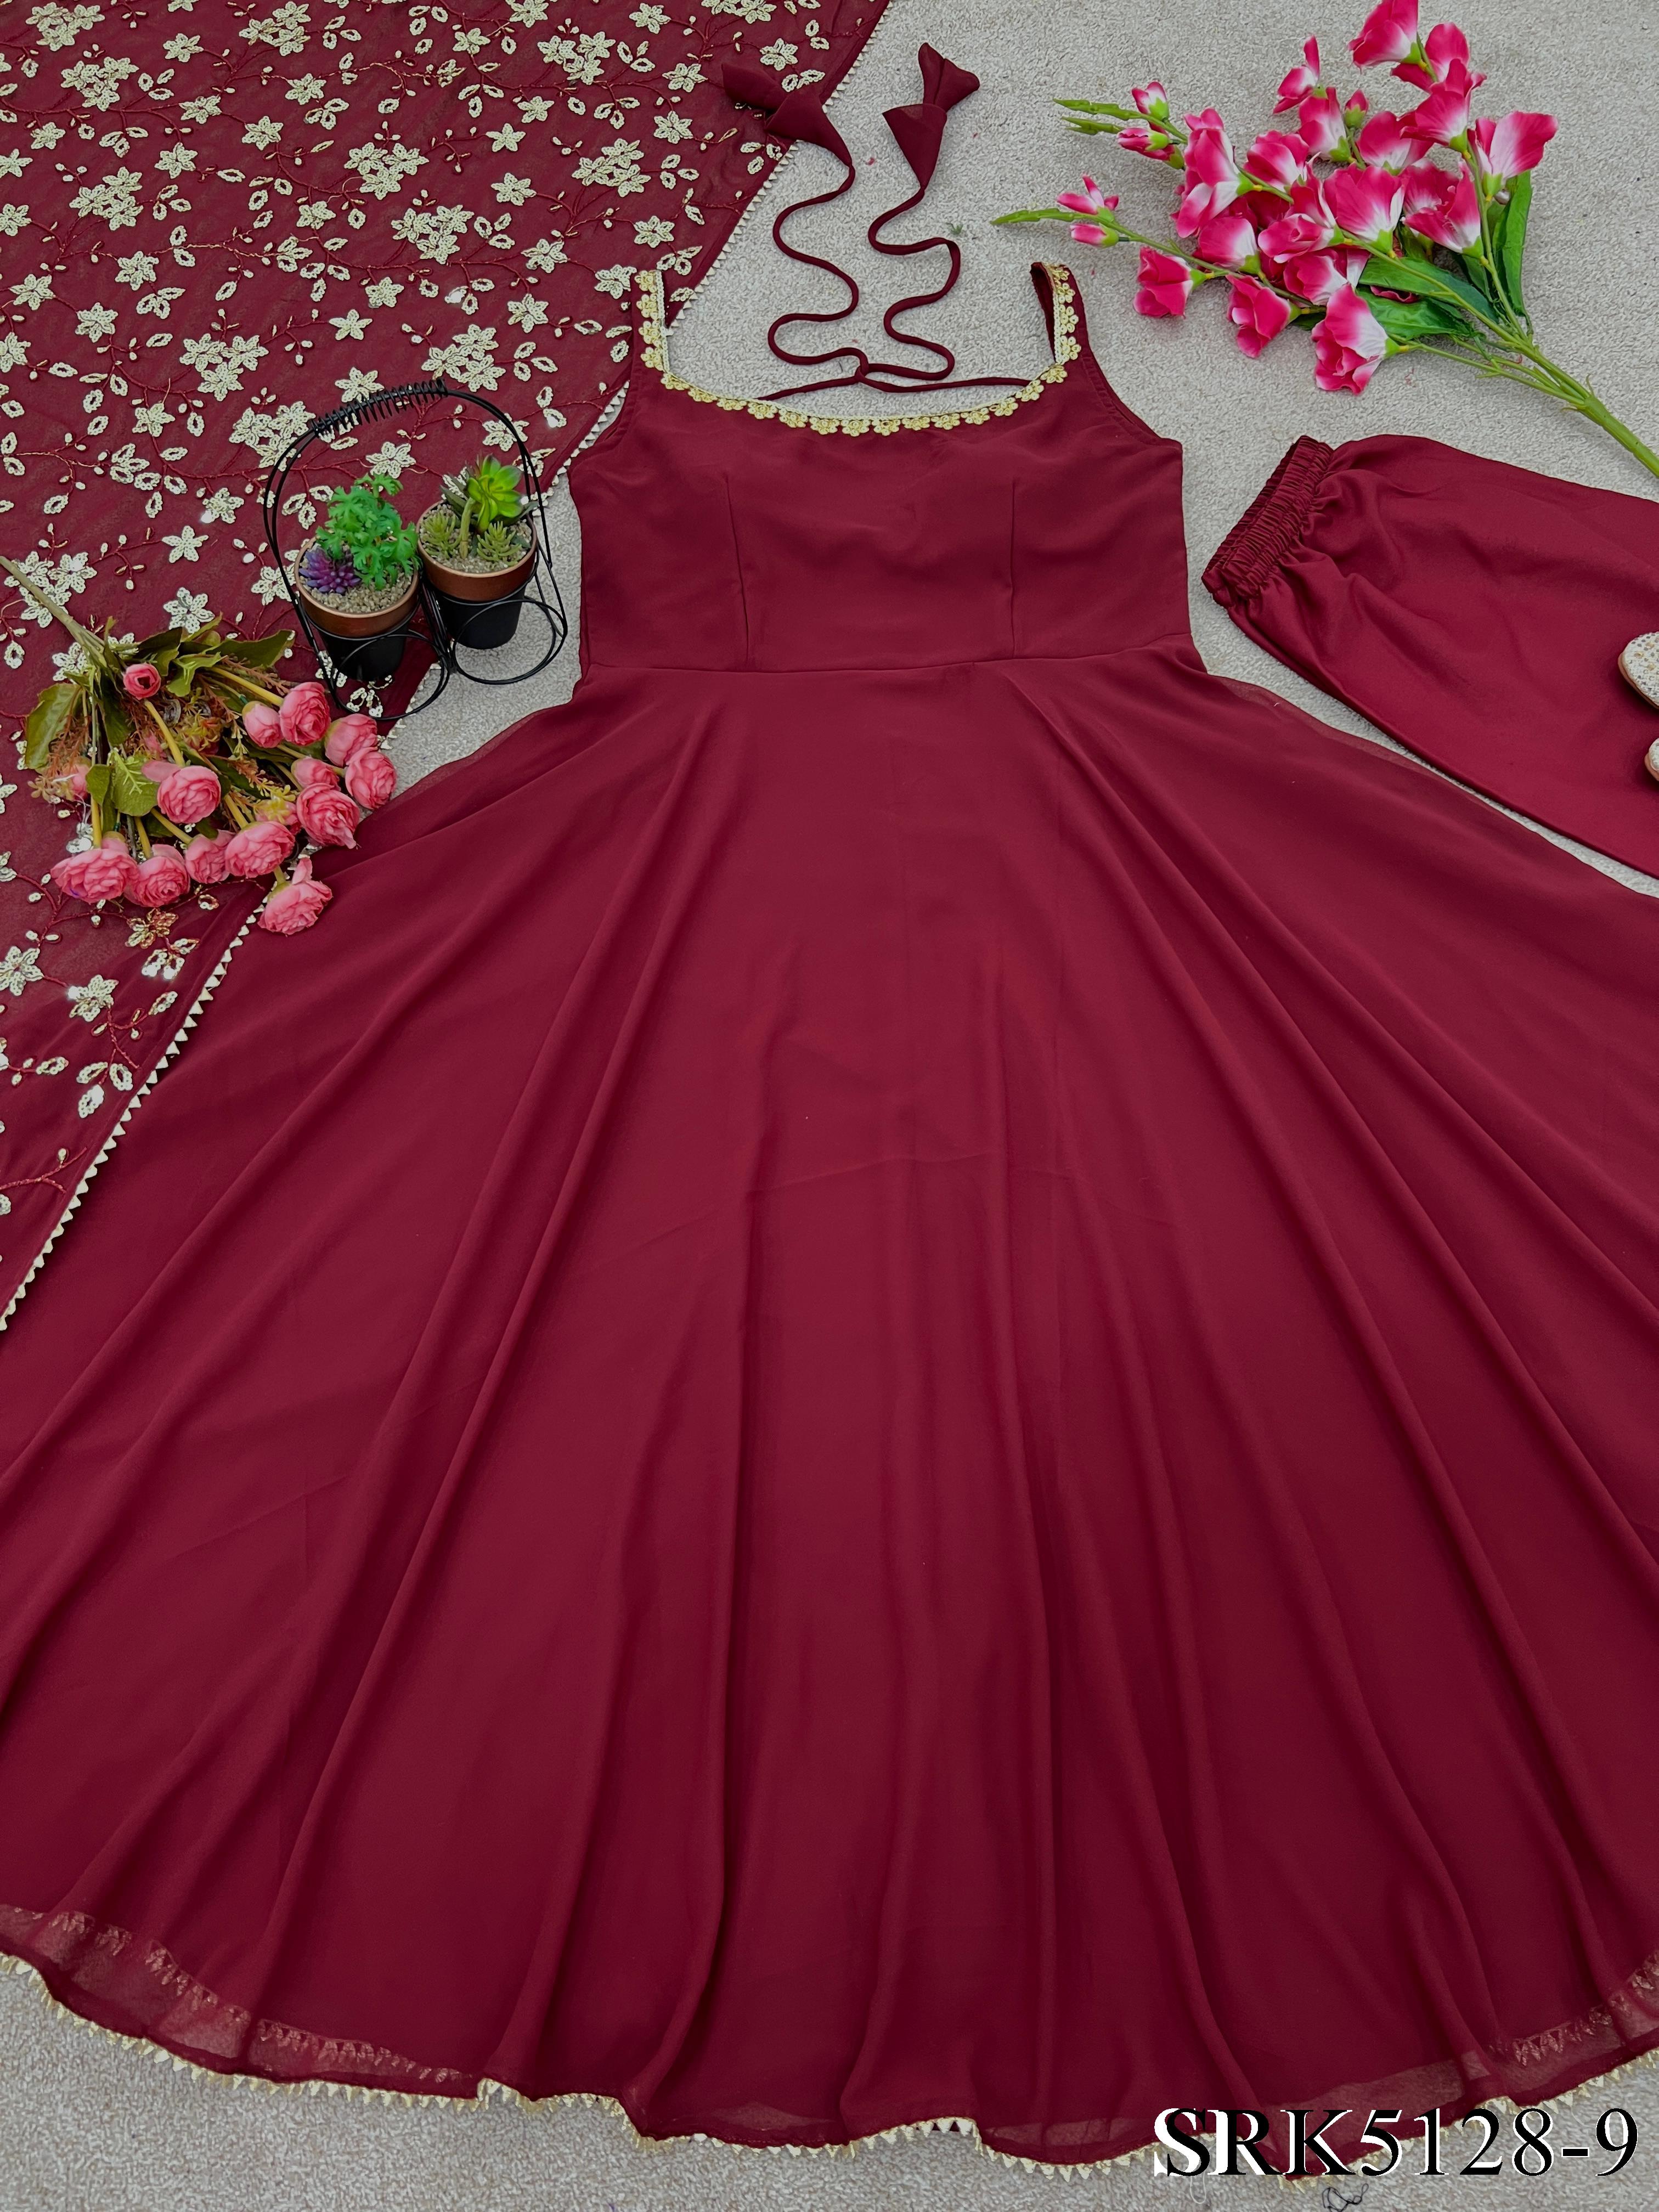 Chilly Red Color Sequence Gown With Heavy Dupatta